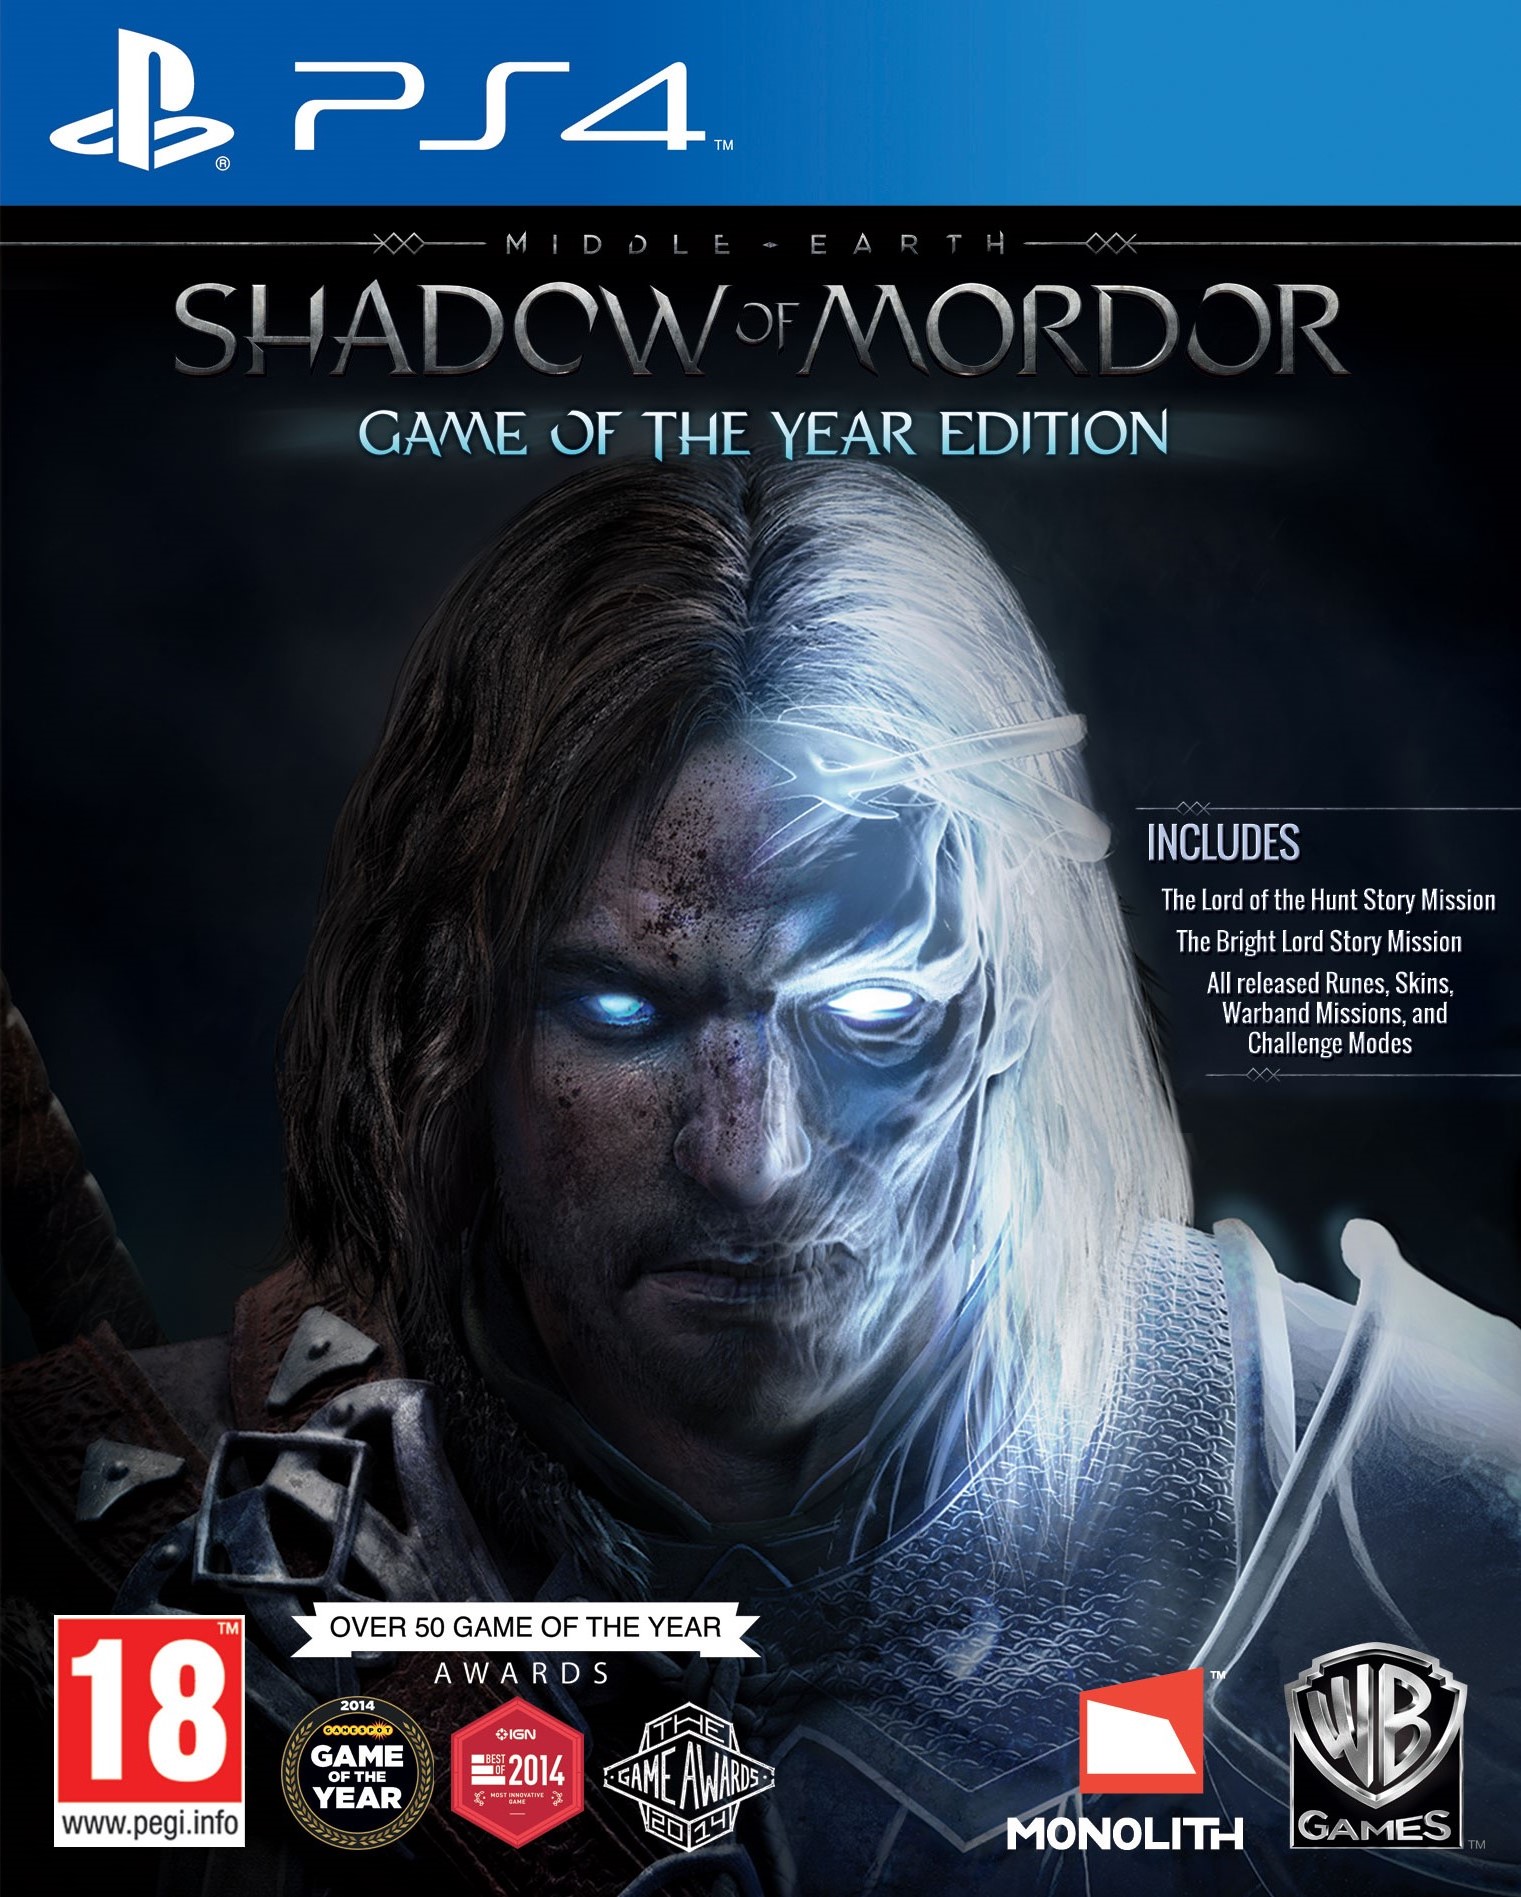 Middle-earth: Shadow of Mordor - Game of the Year Edition [PS4] 5.05 / 6.72 / 7.02 [EUR] (2014) [Русский] (v1.03)